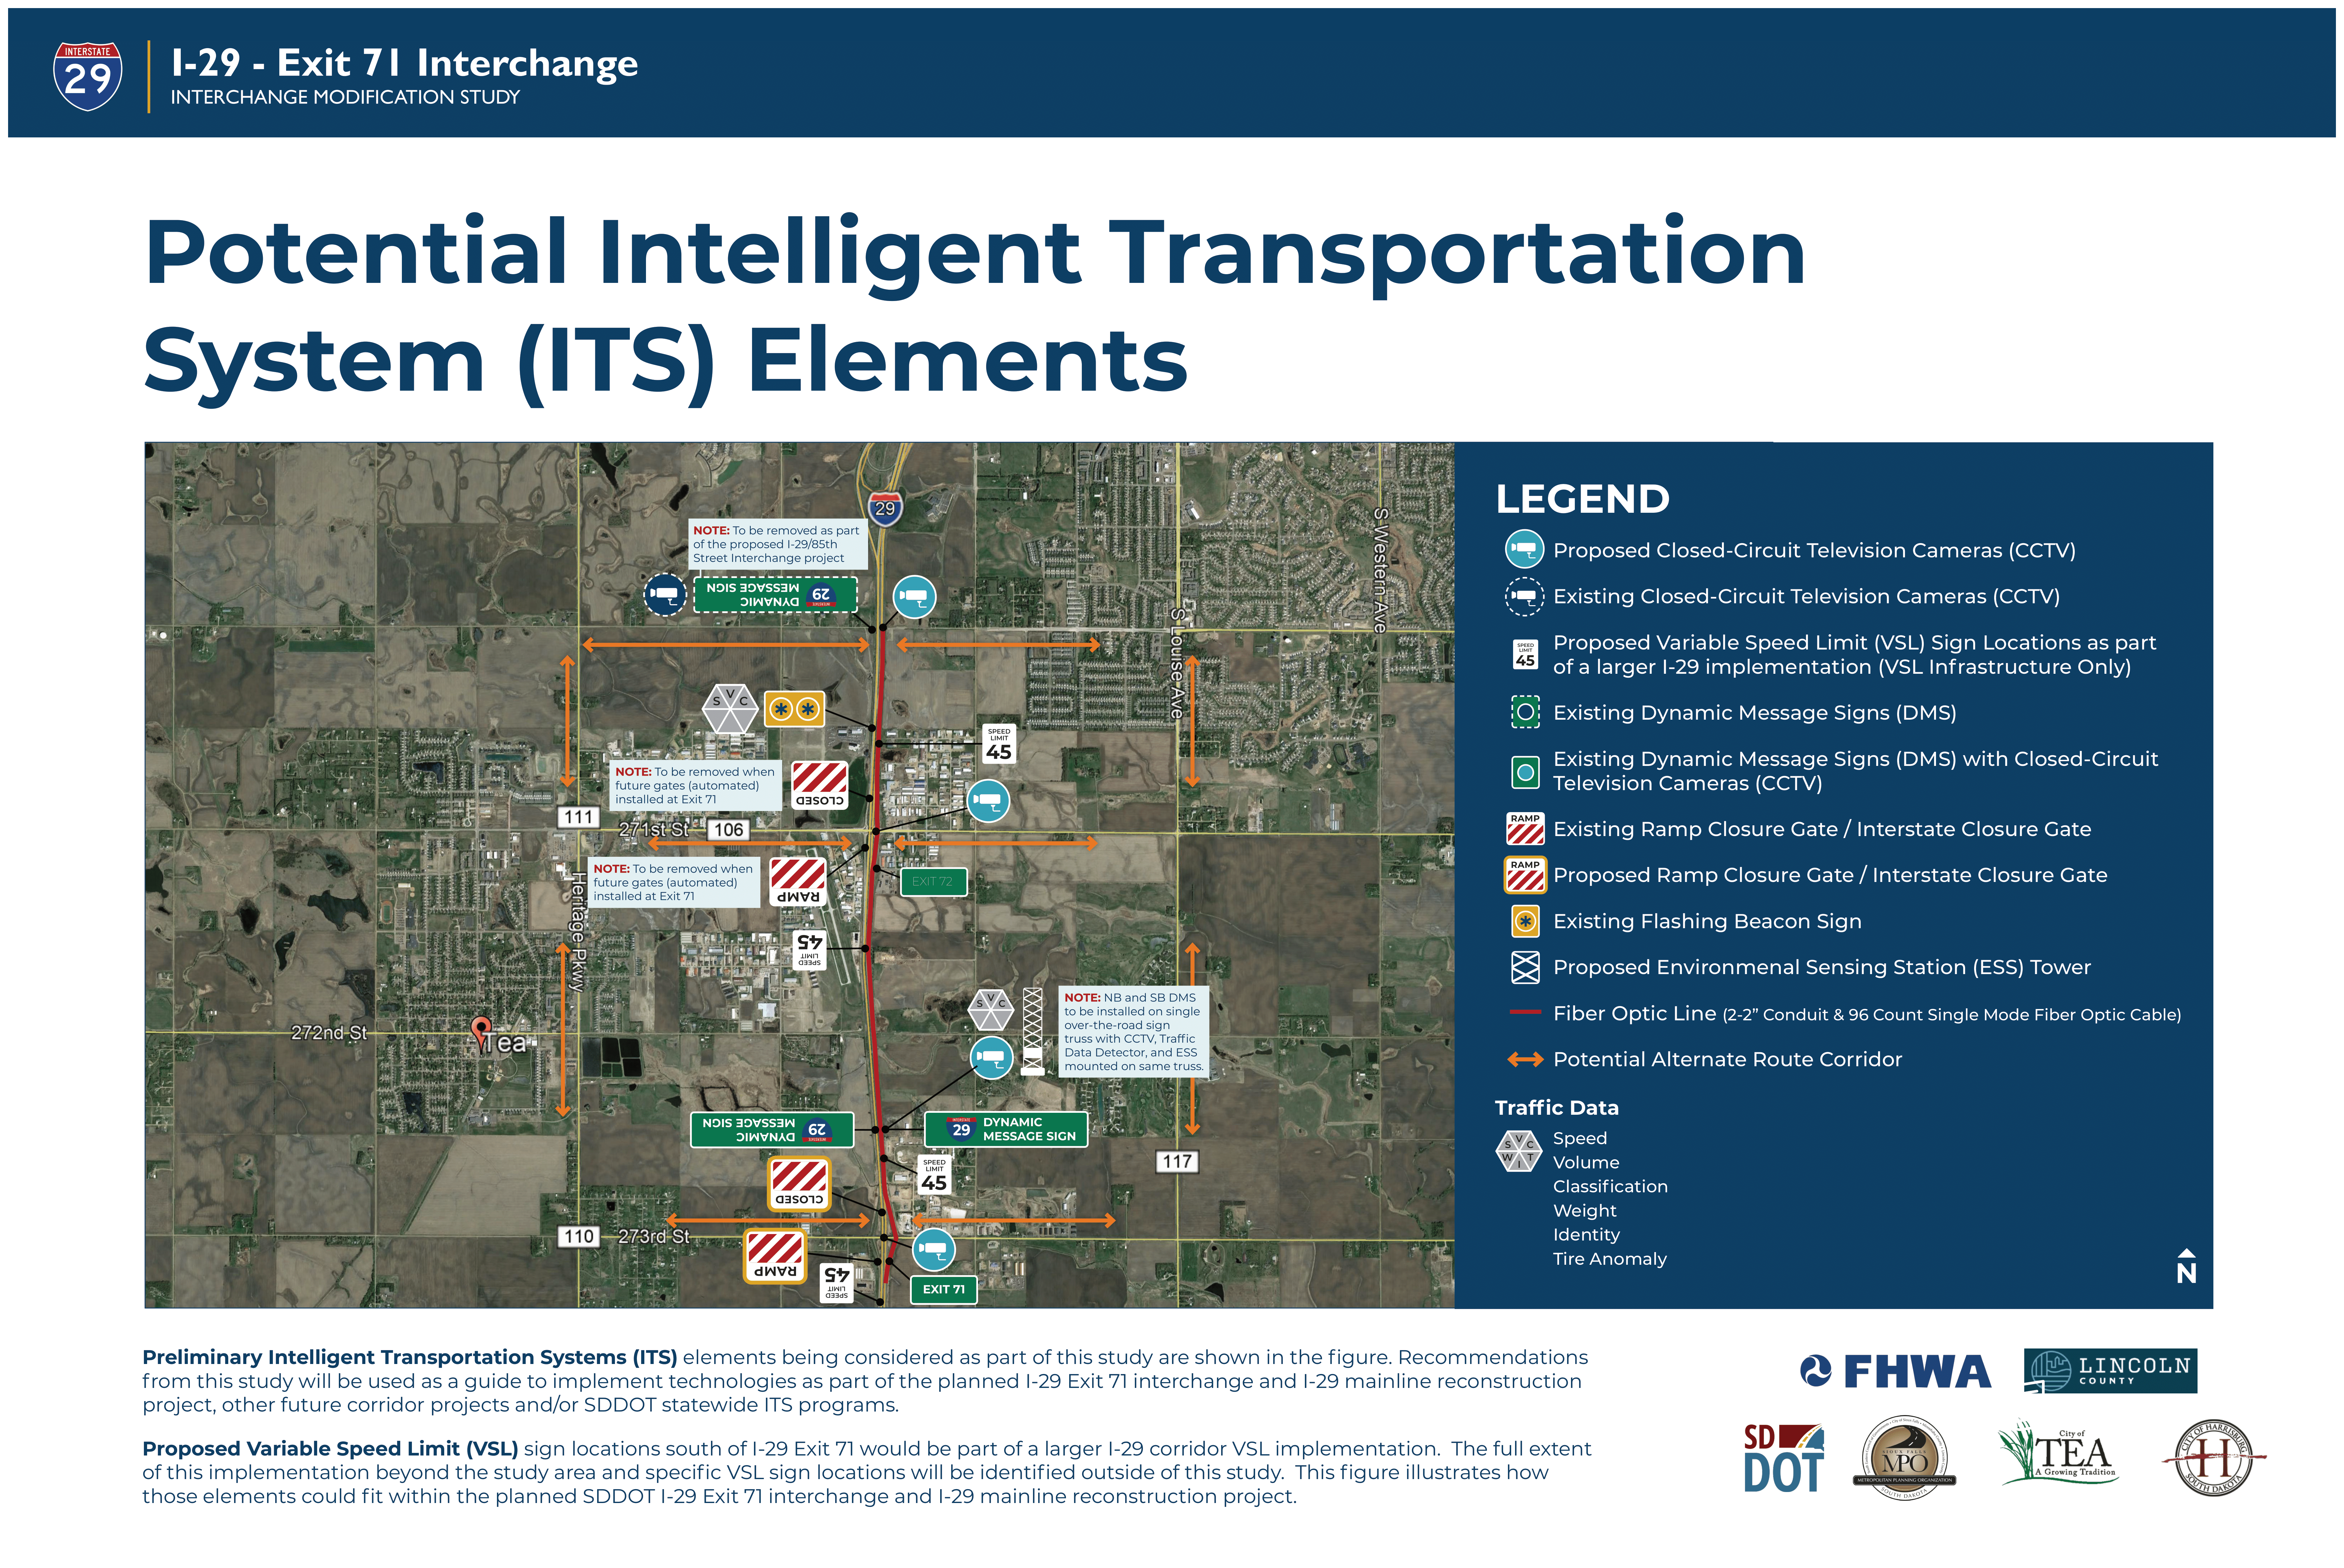 This image shows potential Intelligent Transportation System (ITS) elements within the study area.  Both existing and proposed elements are shown, including closed-circuit television cameras (CCTV), variable speed limit (VSL) sign locations, dynamic message signs (DMS), ramp and interstate closure gates, flashing beacon signs, environmental sensing station (ESS) towers, fiber optic lines, and traffic data collection type and locations. 